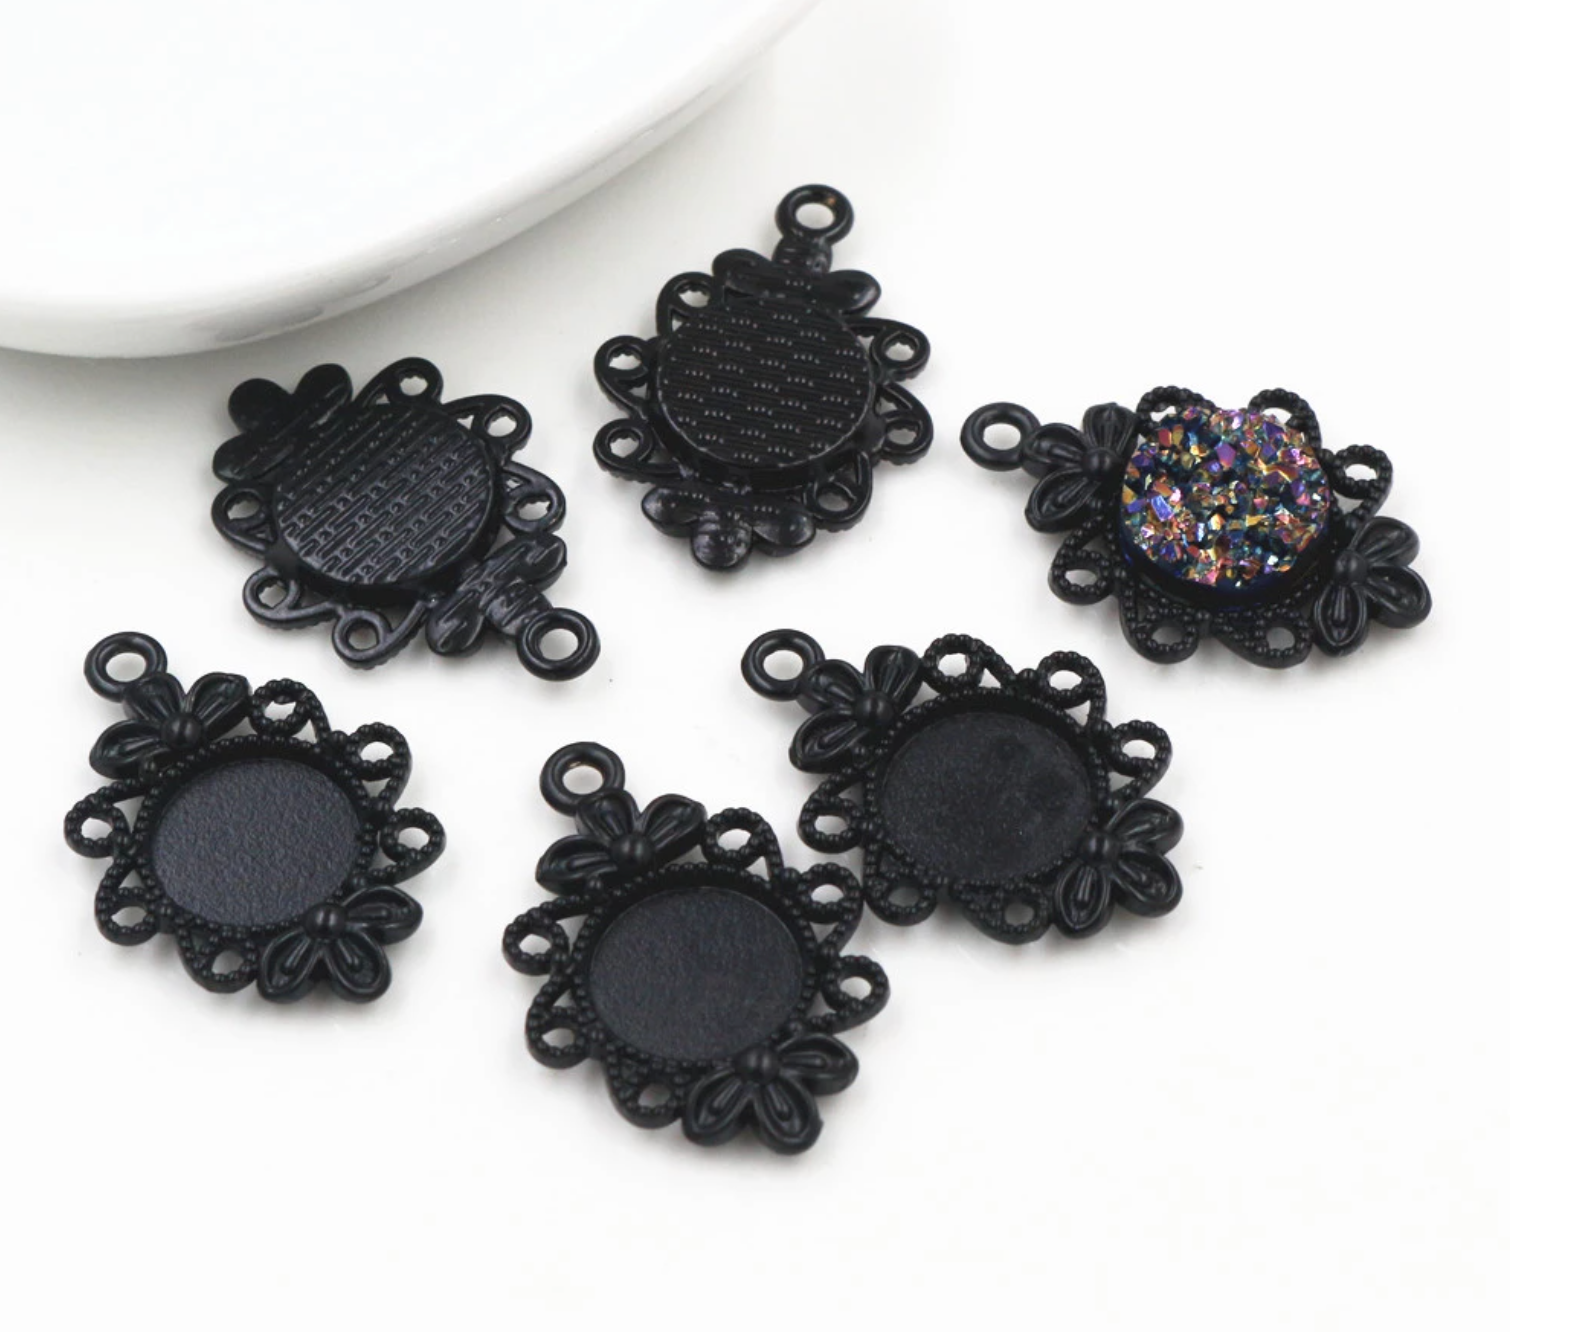 4pcs, 12mm Inner Size Flower Style Cabochon Base Cameo Setting Charms Pendant in Black